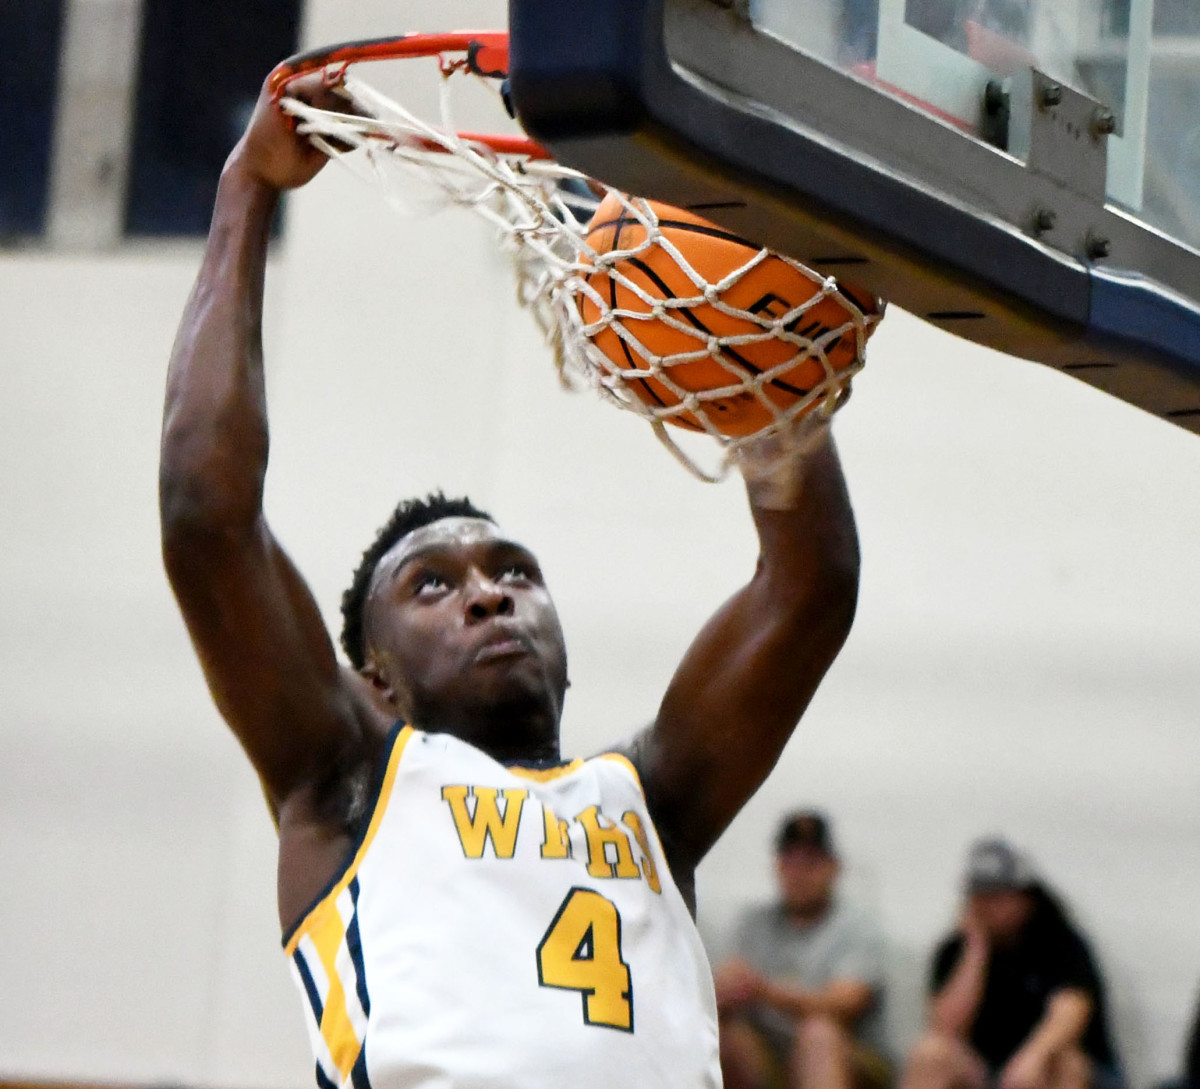 Winter Haven junior shooting guard Isaac Celiscar unleashes a slam dunk during the second quarter against Tampa Plant in a Class 7A Regional semifinal on Tuesday at Winter Haven.